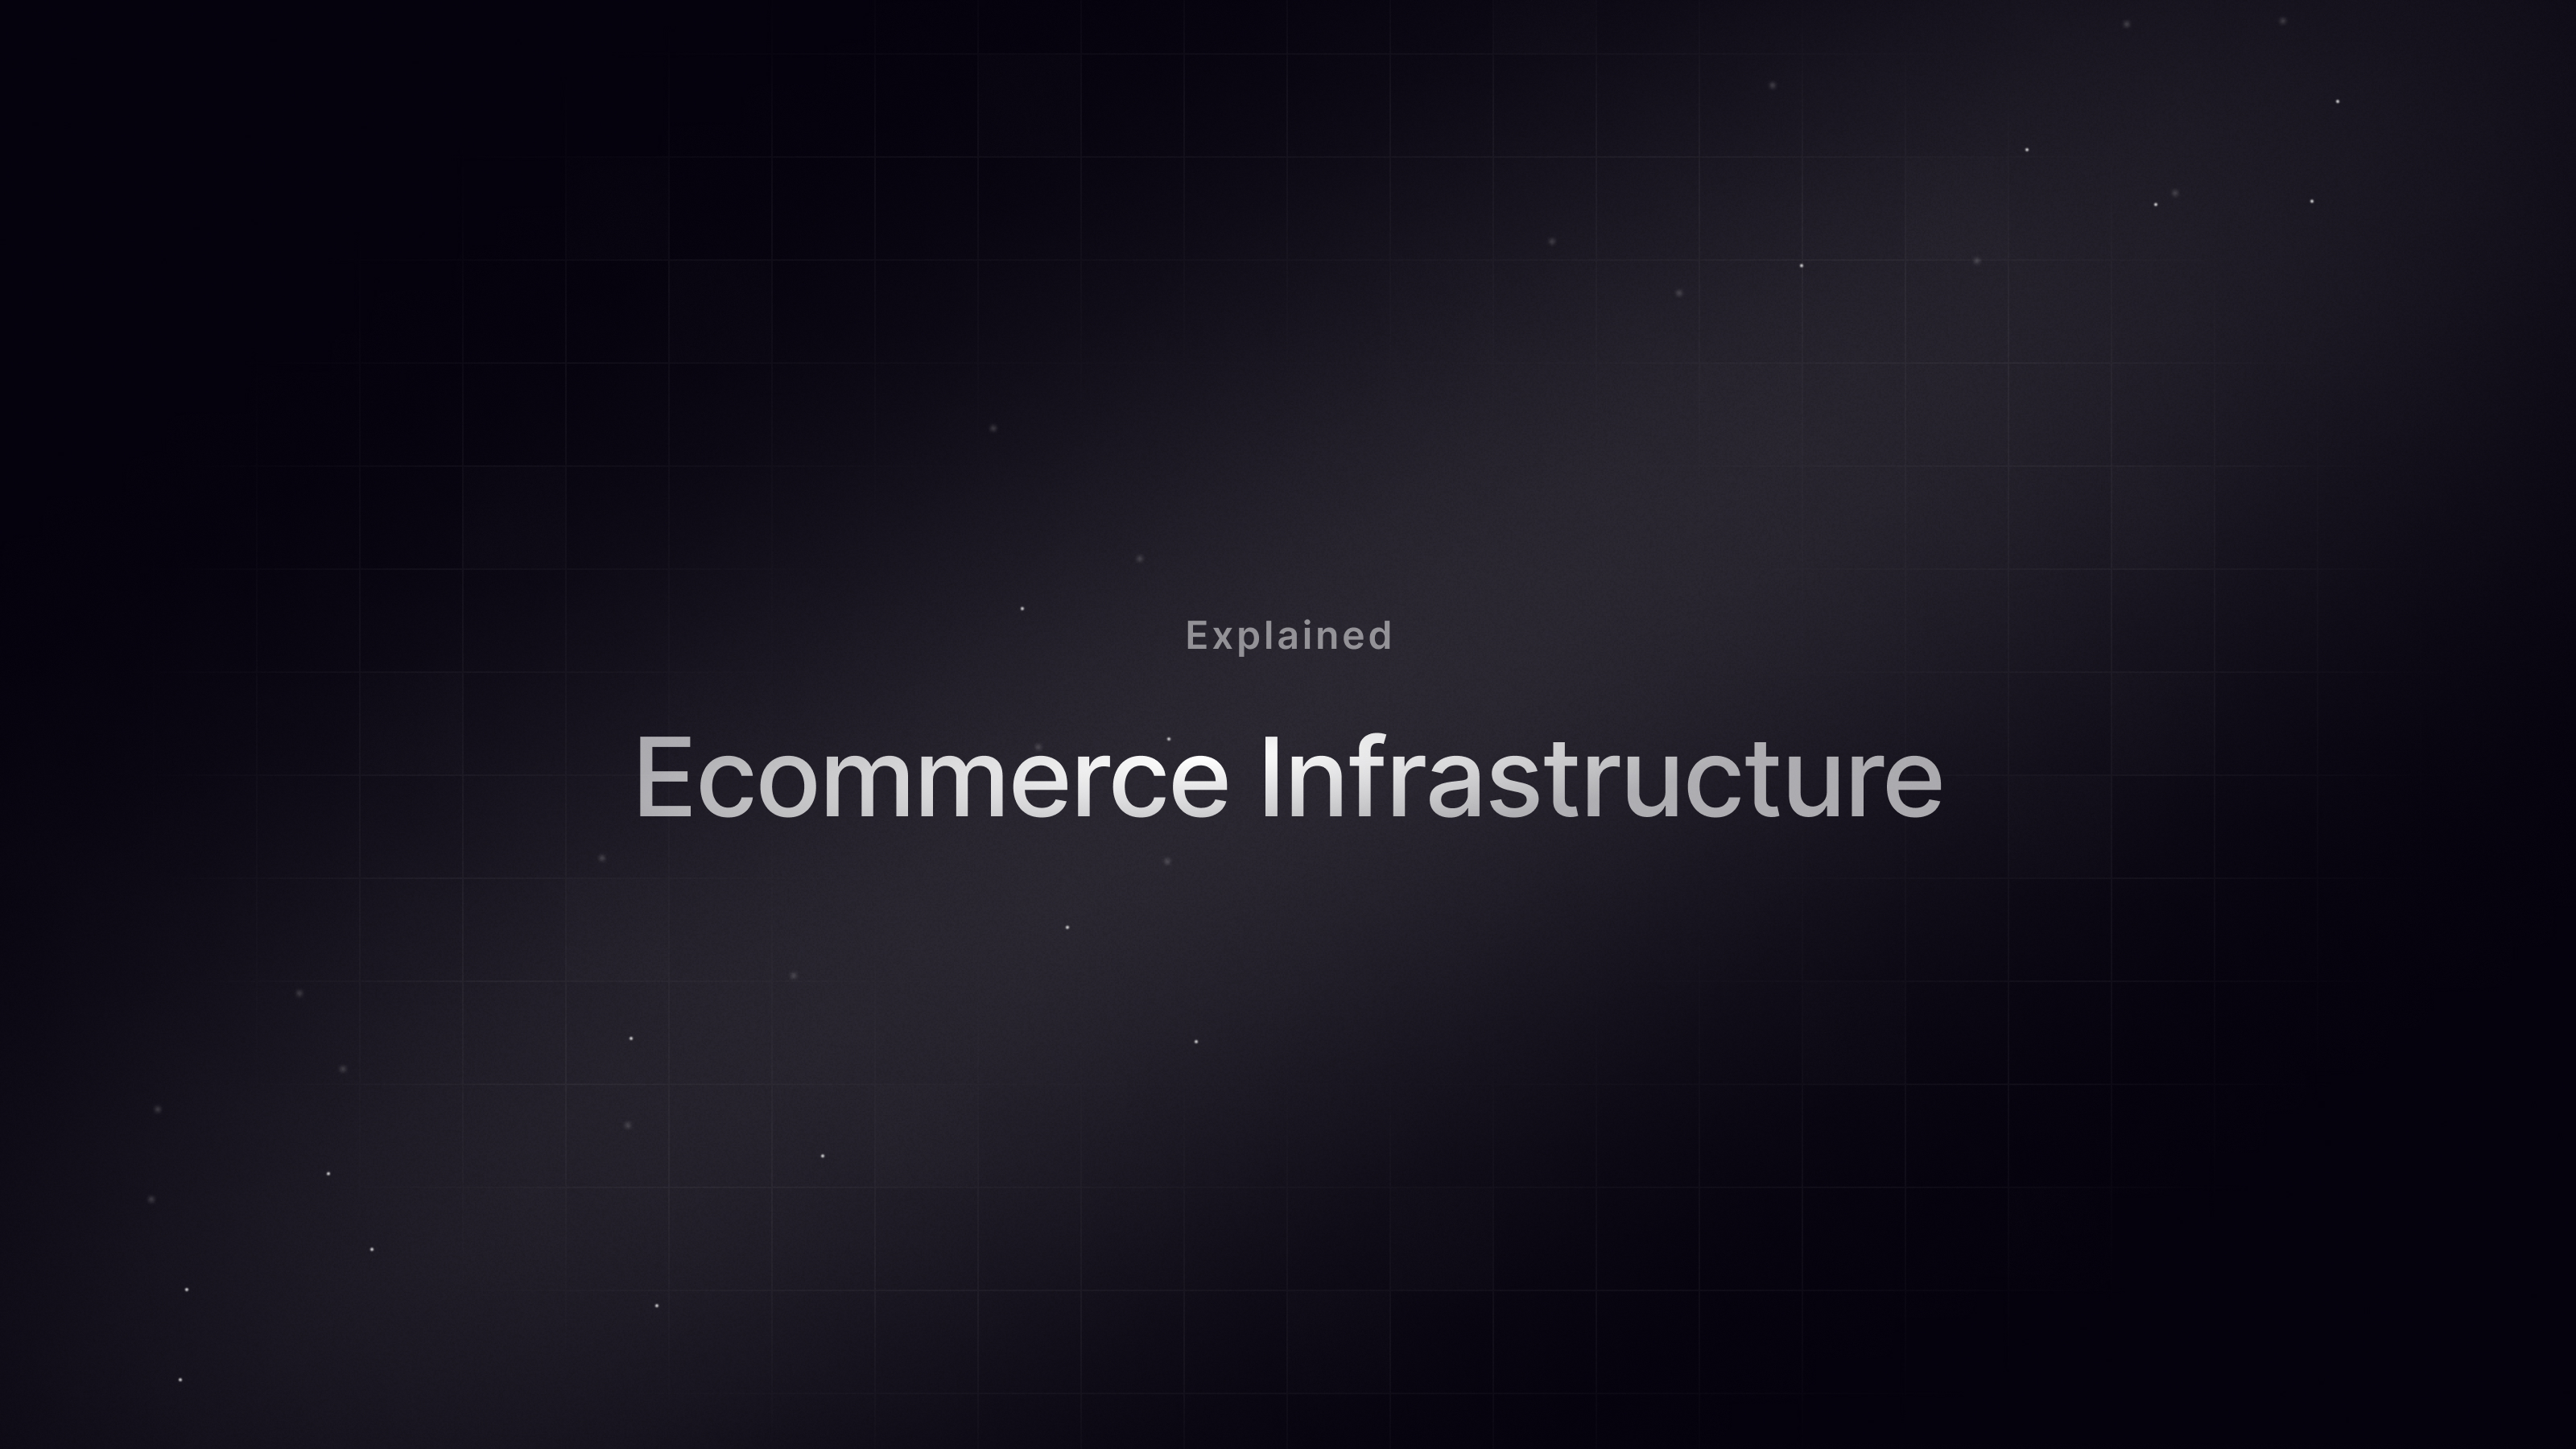 Ecommerce Infrastructure: What it is